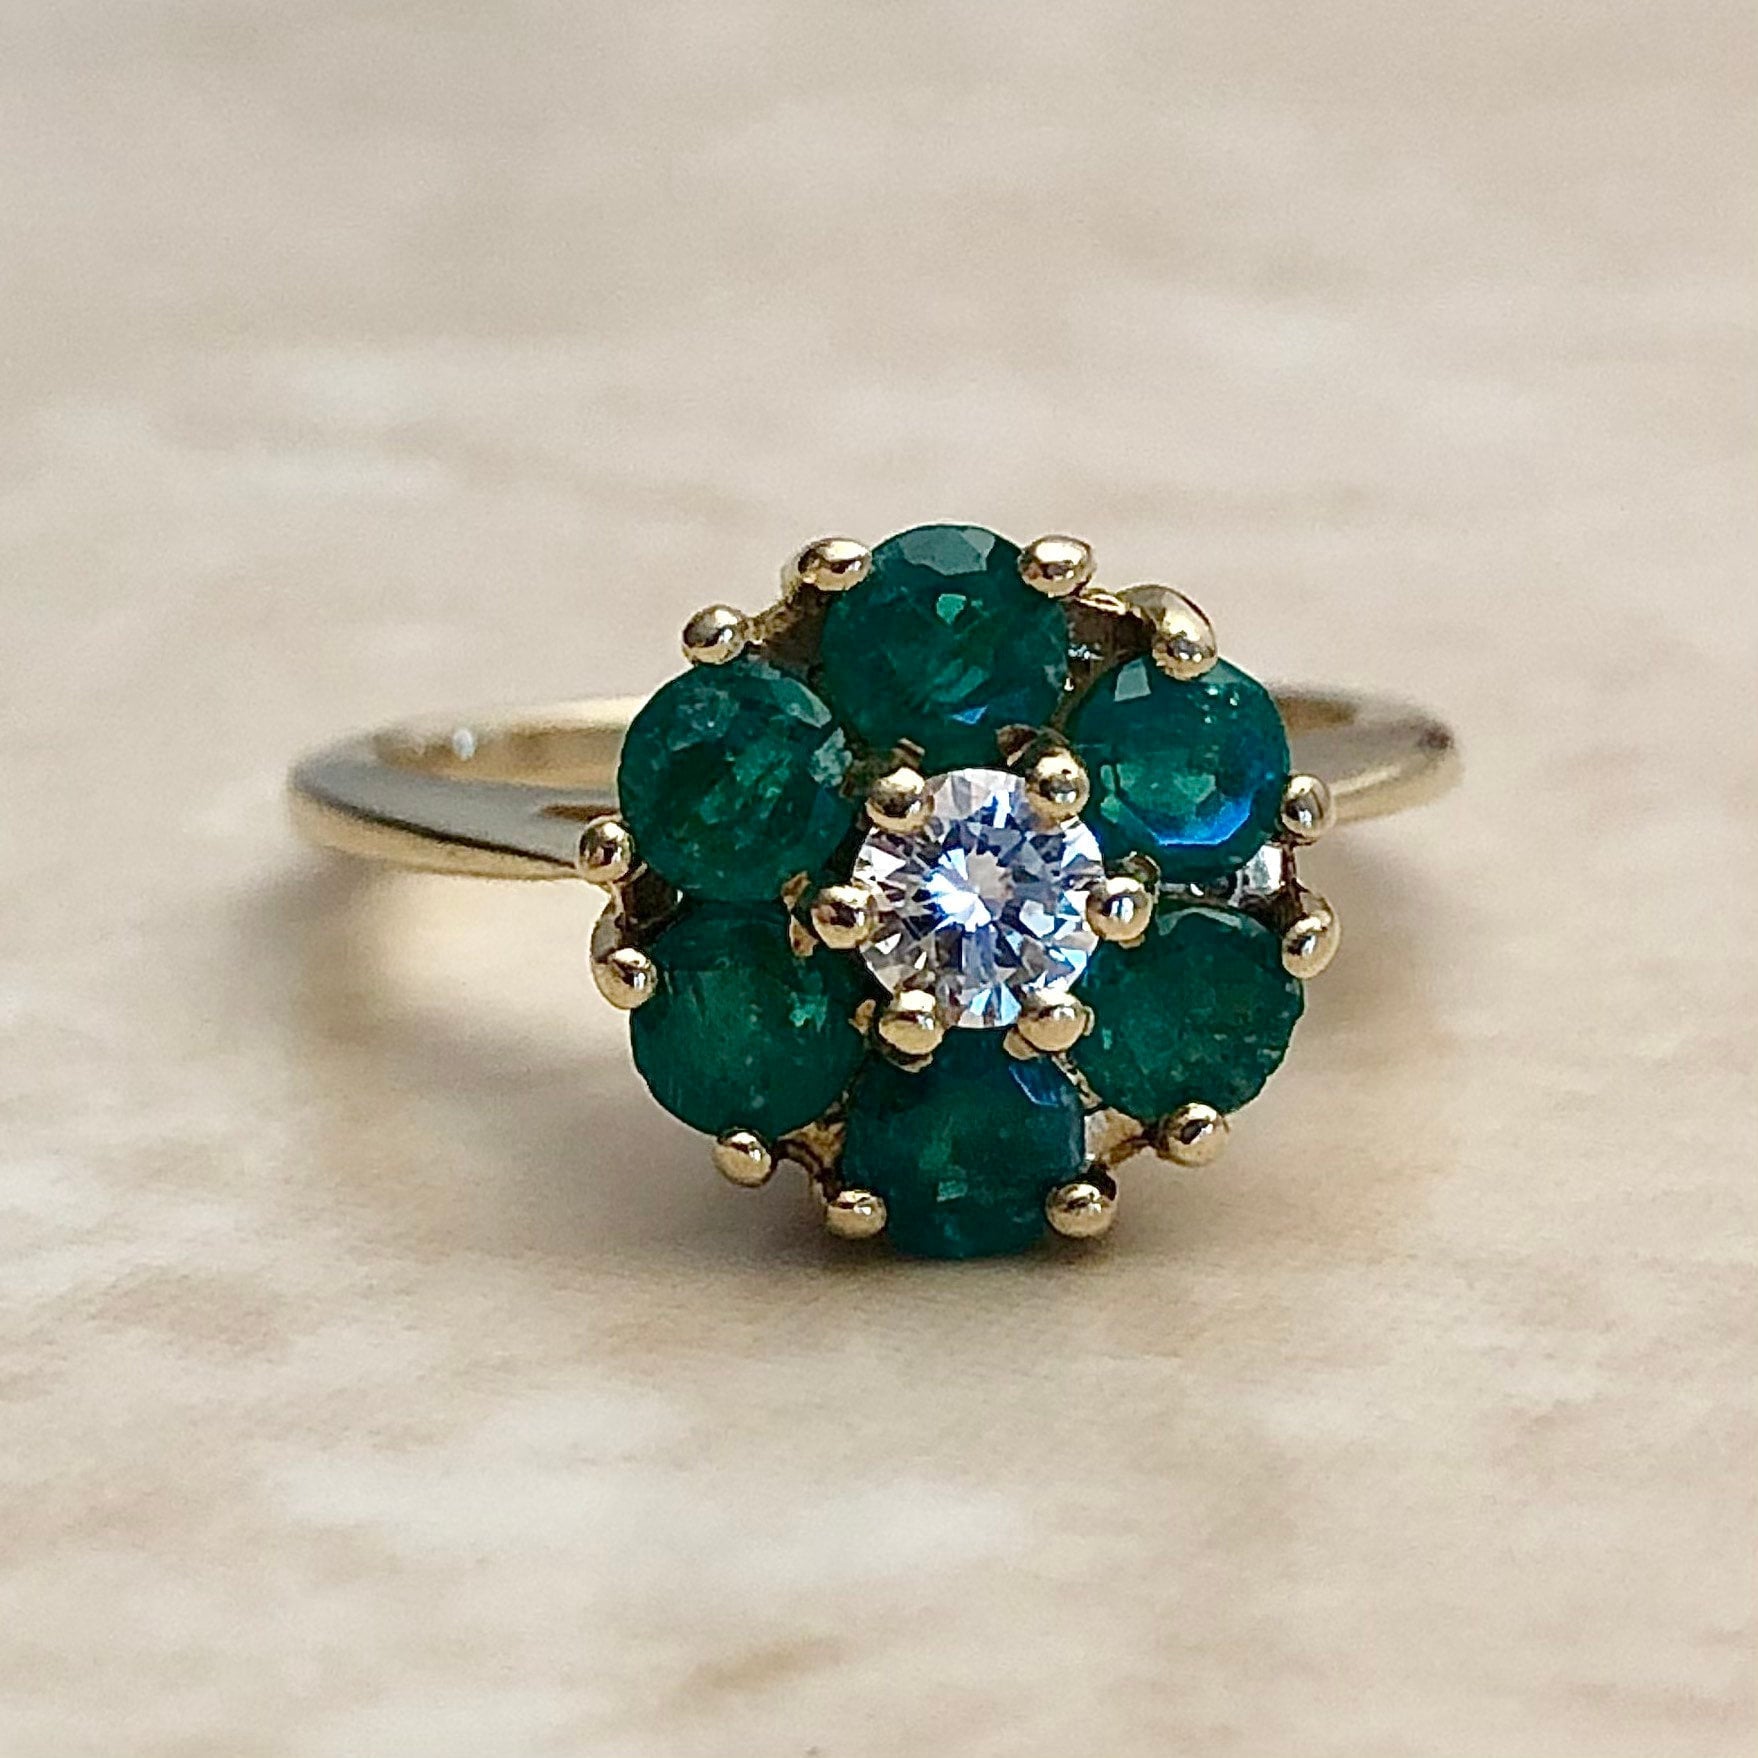 Fine Vintage 14 Karat Yellow Gold Diamond & Natural Emerald Halo Ring - April May Brithstone Gift - Cocktail Ring - Promise Ring - Size 6.25